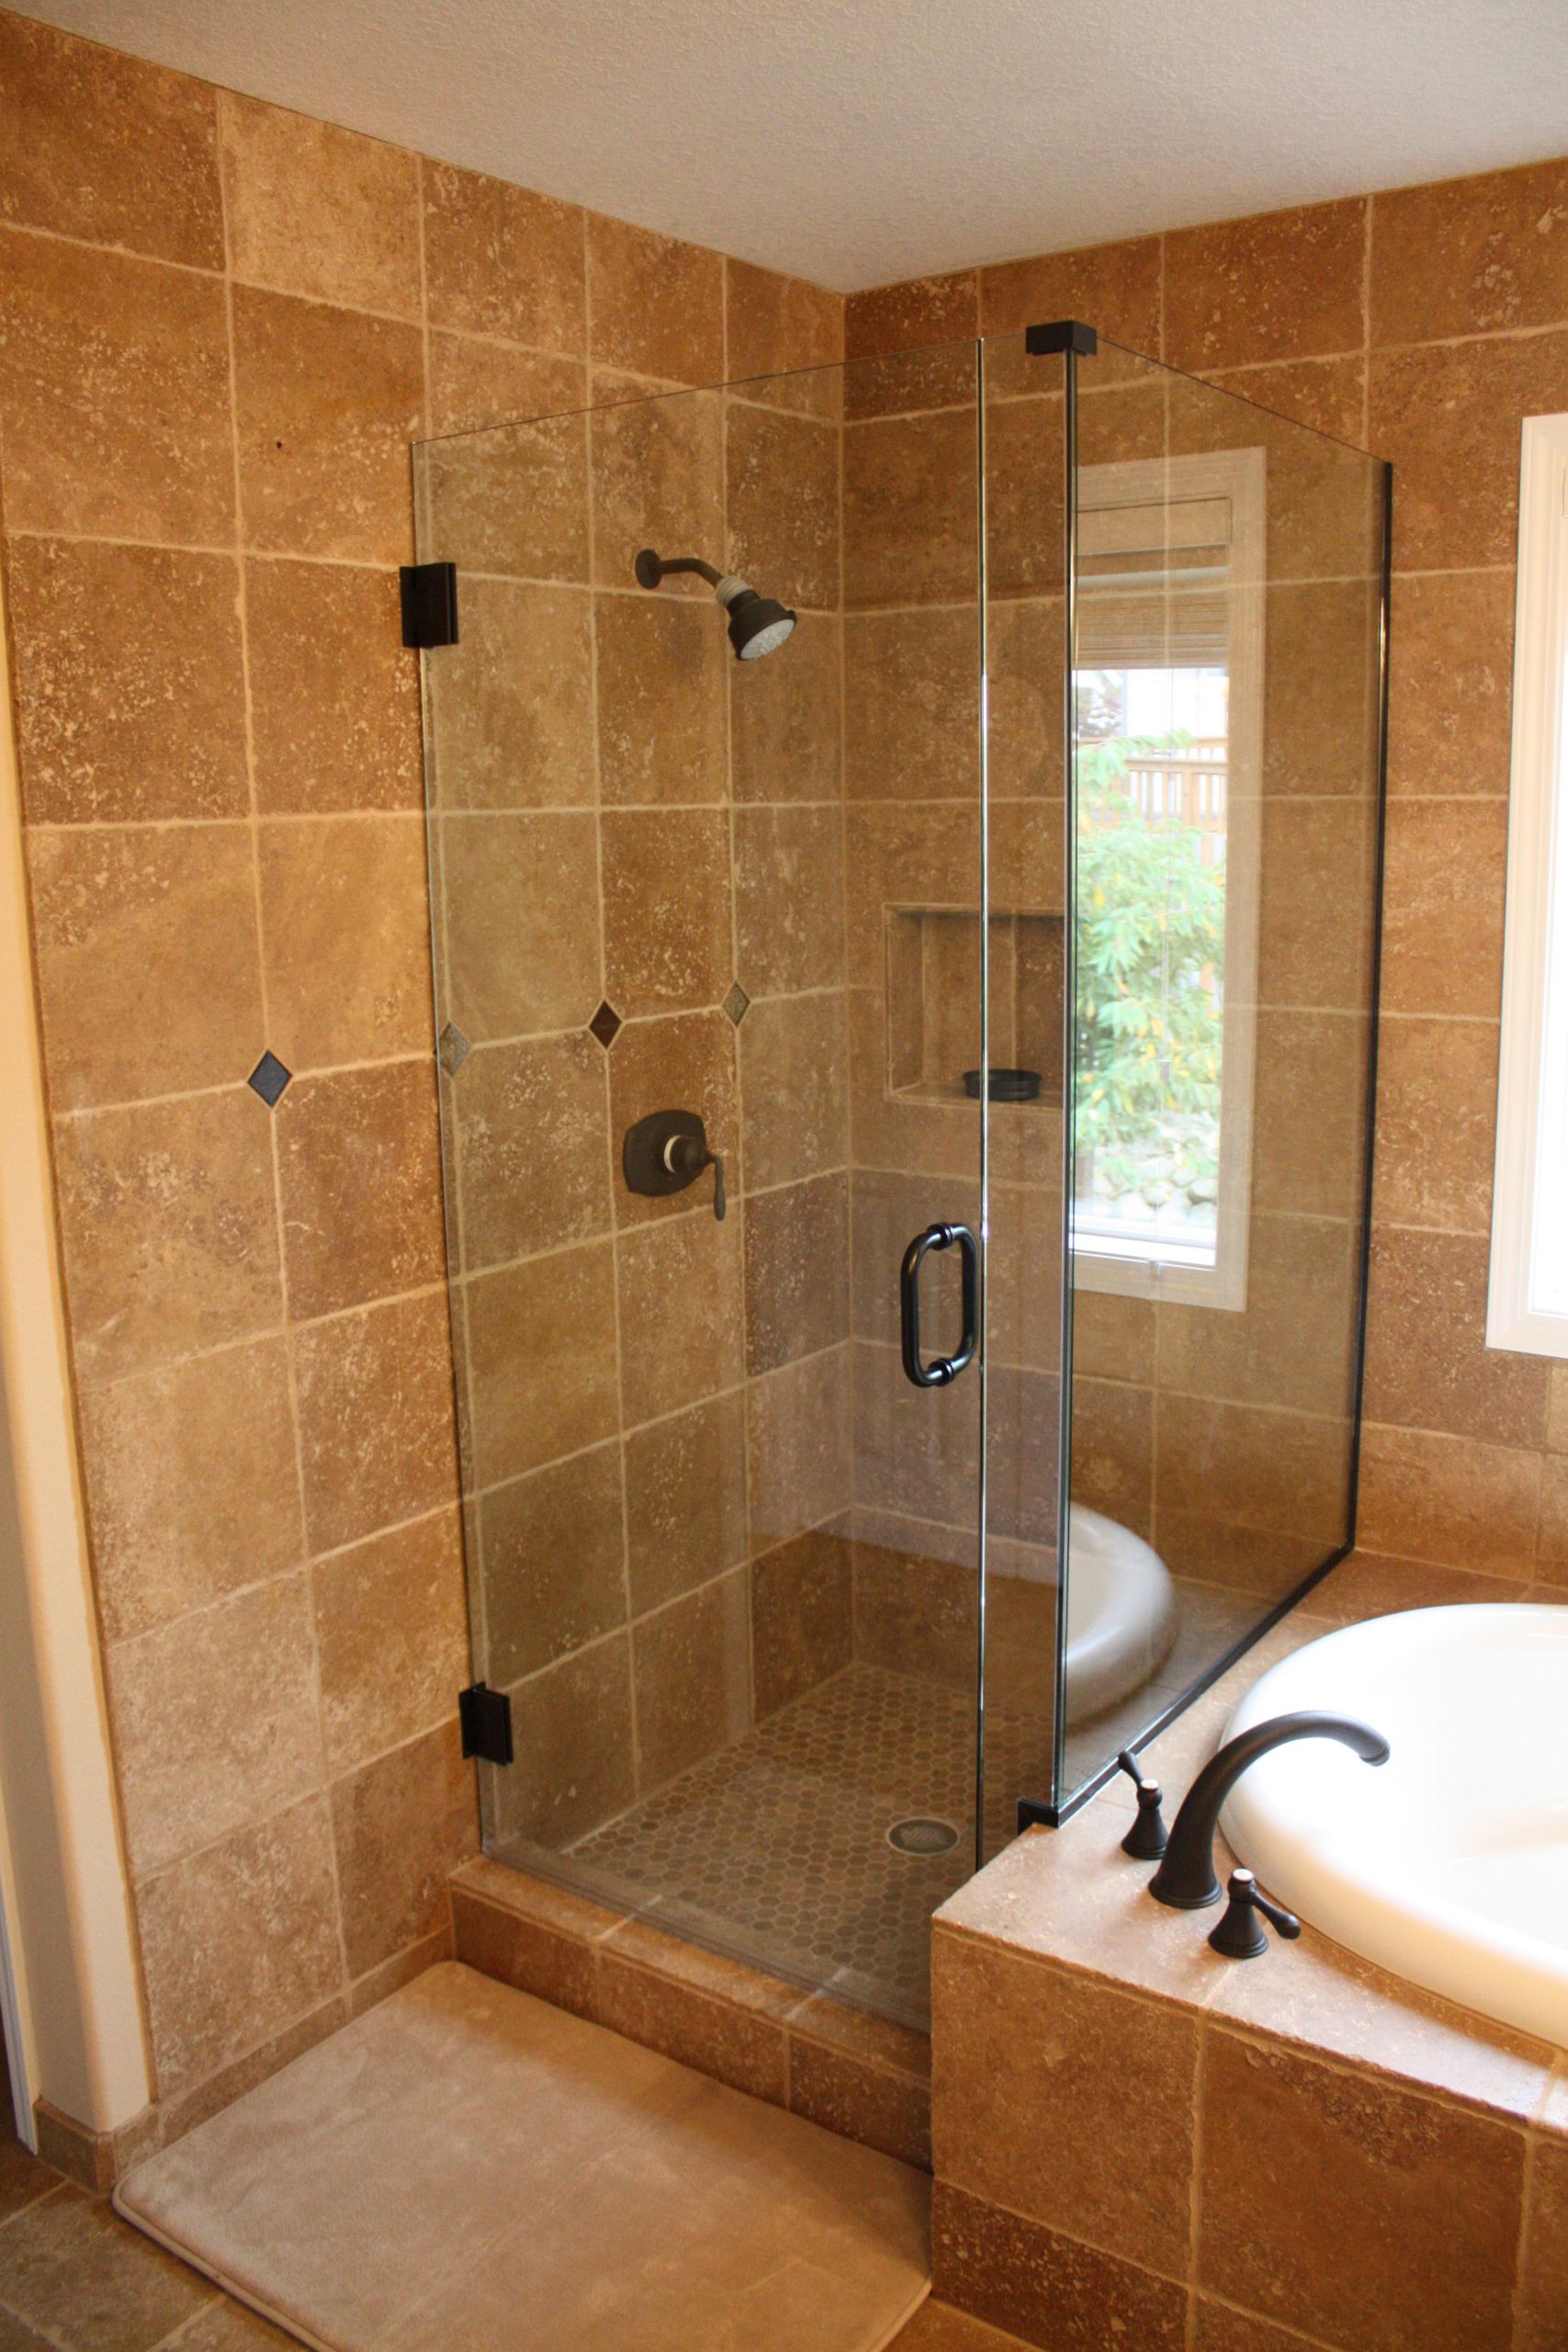 Bathroom Shower Tile Ideas
 31 cool ideas and pictures of natural stone bathroom